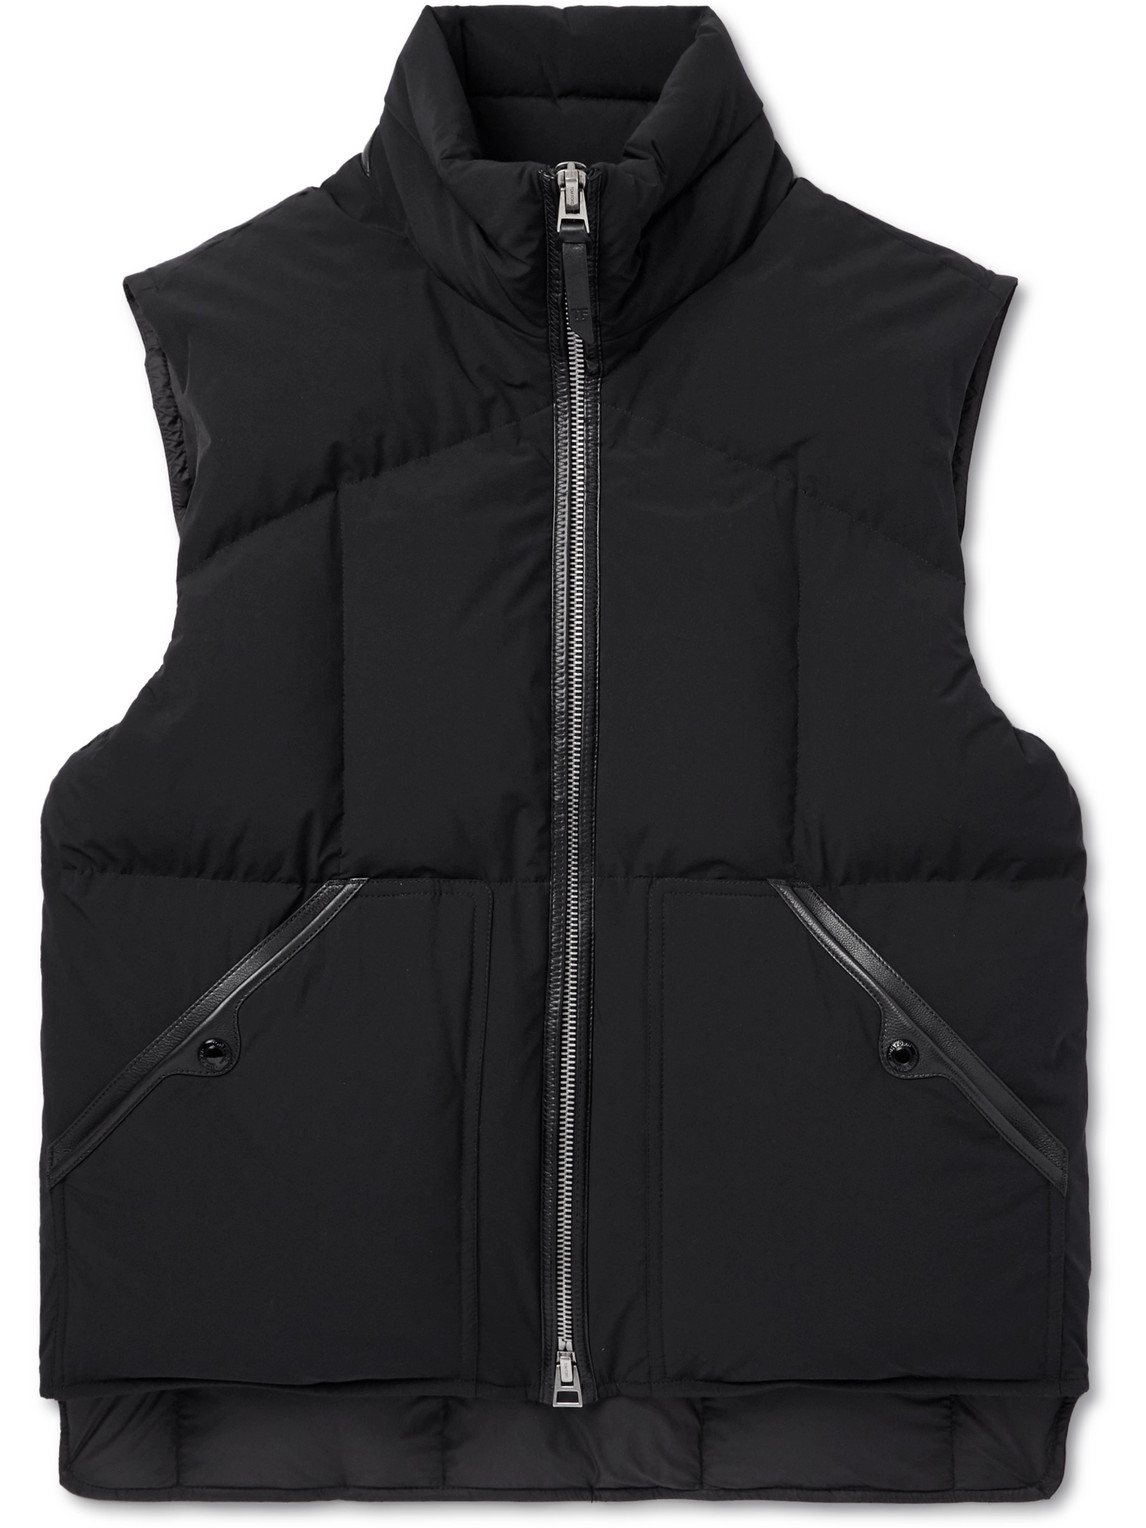 TOM FORD - Leather-Trimmed Quilted Shell Gilet - Men - Black - IT 50 von TOM FORD